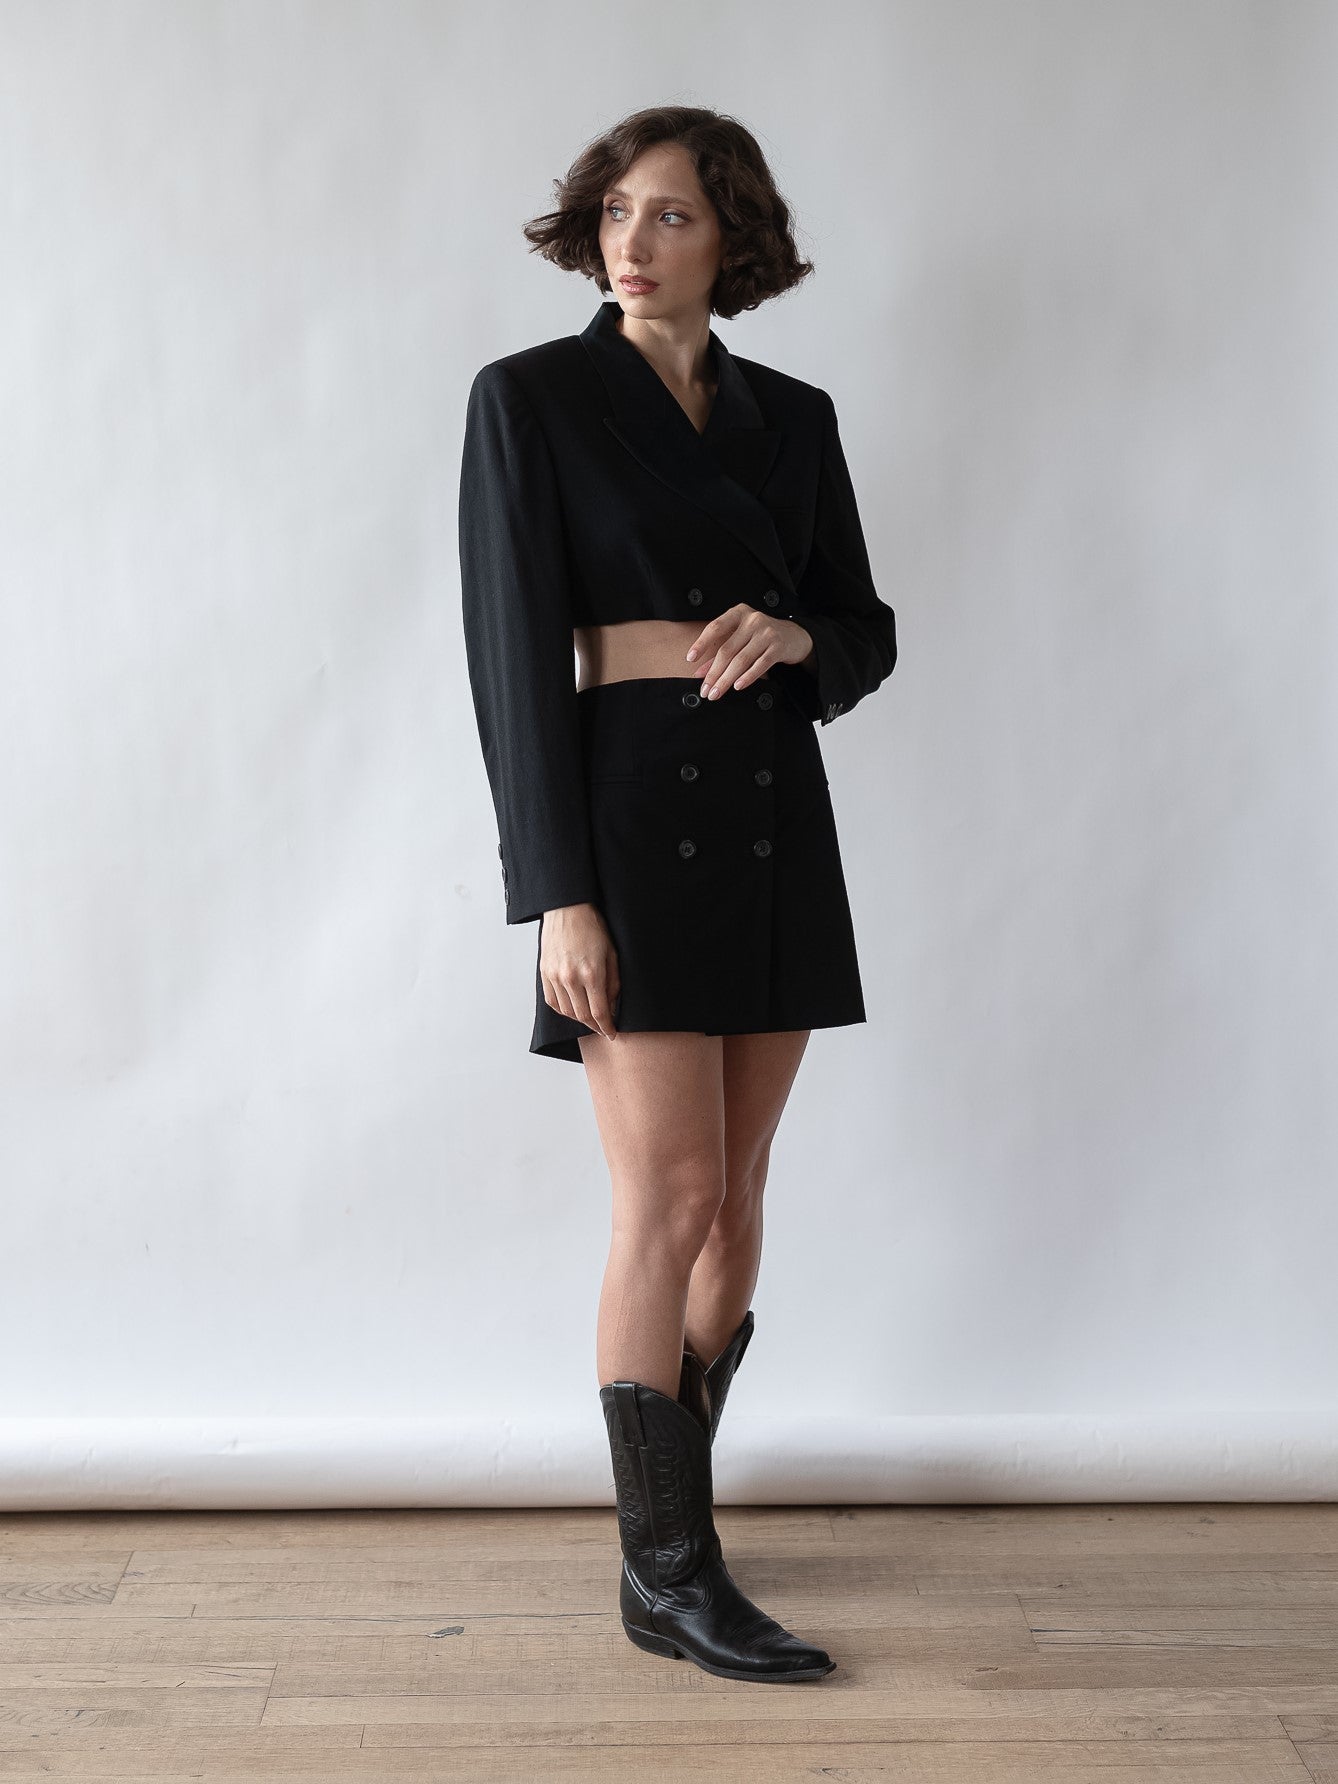 Vintage 80's Reworked Co-ord Black Skirt and Cropped Blazer Light Wool Suit